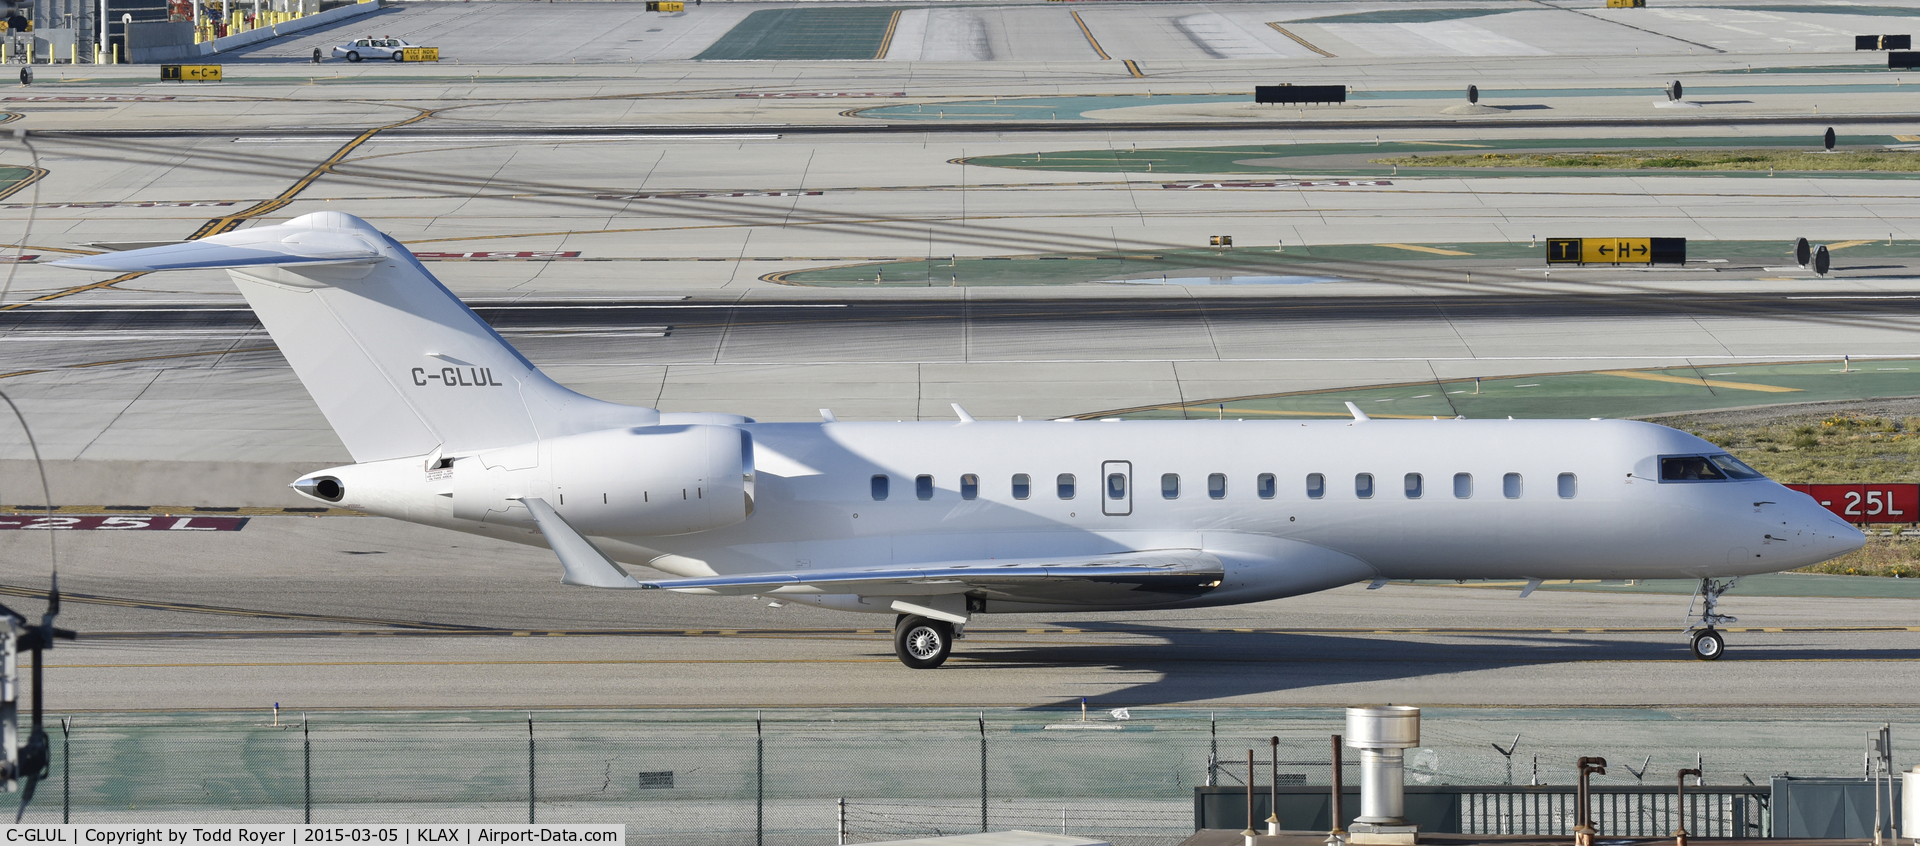 C-GLUL, 2007 Bombardier BD-700-1A10 Global Express C/N 9264, Taxiing to parking at LAX